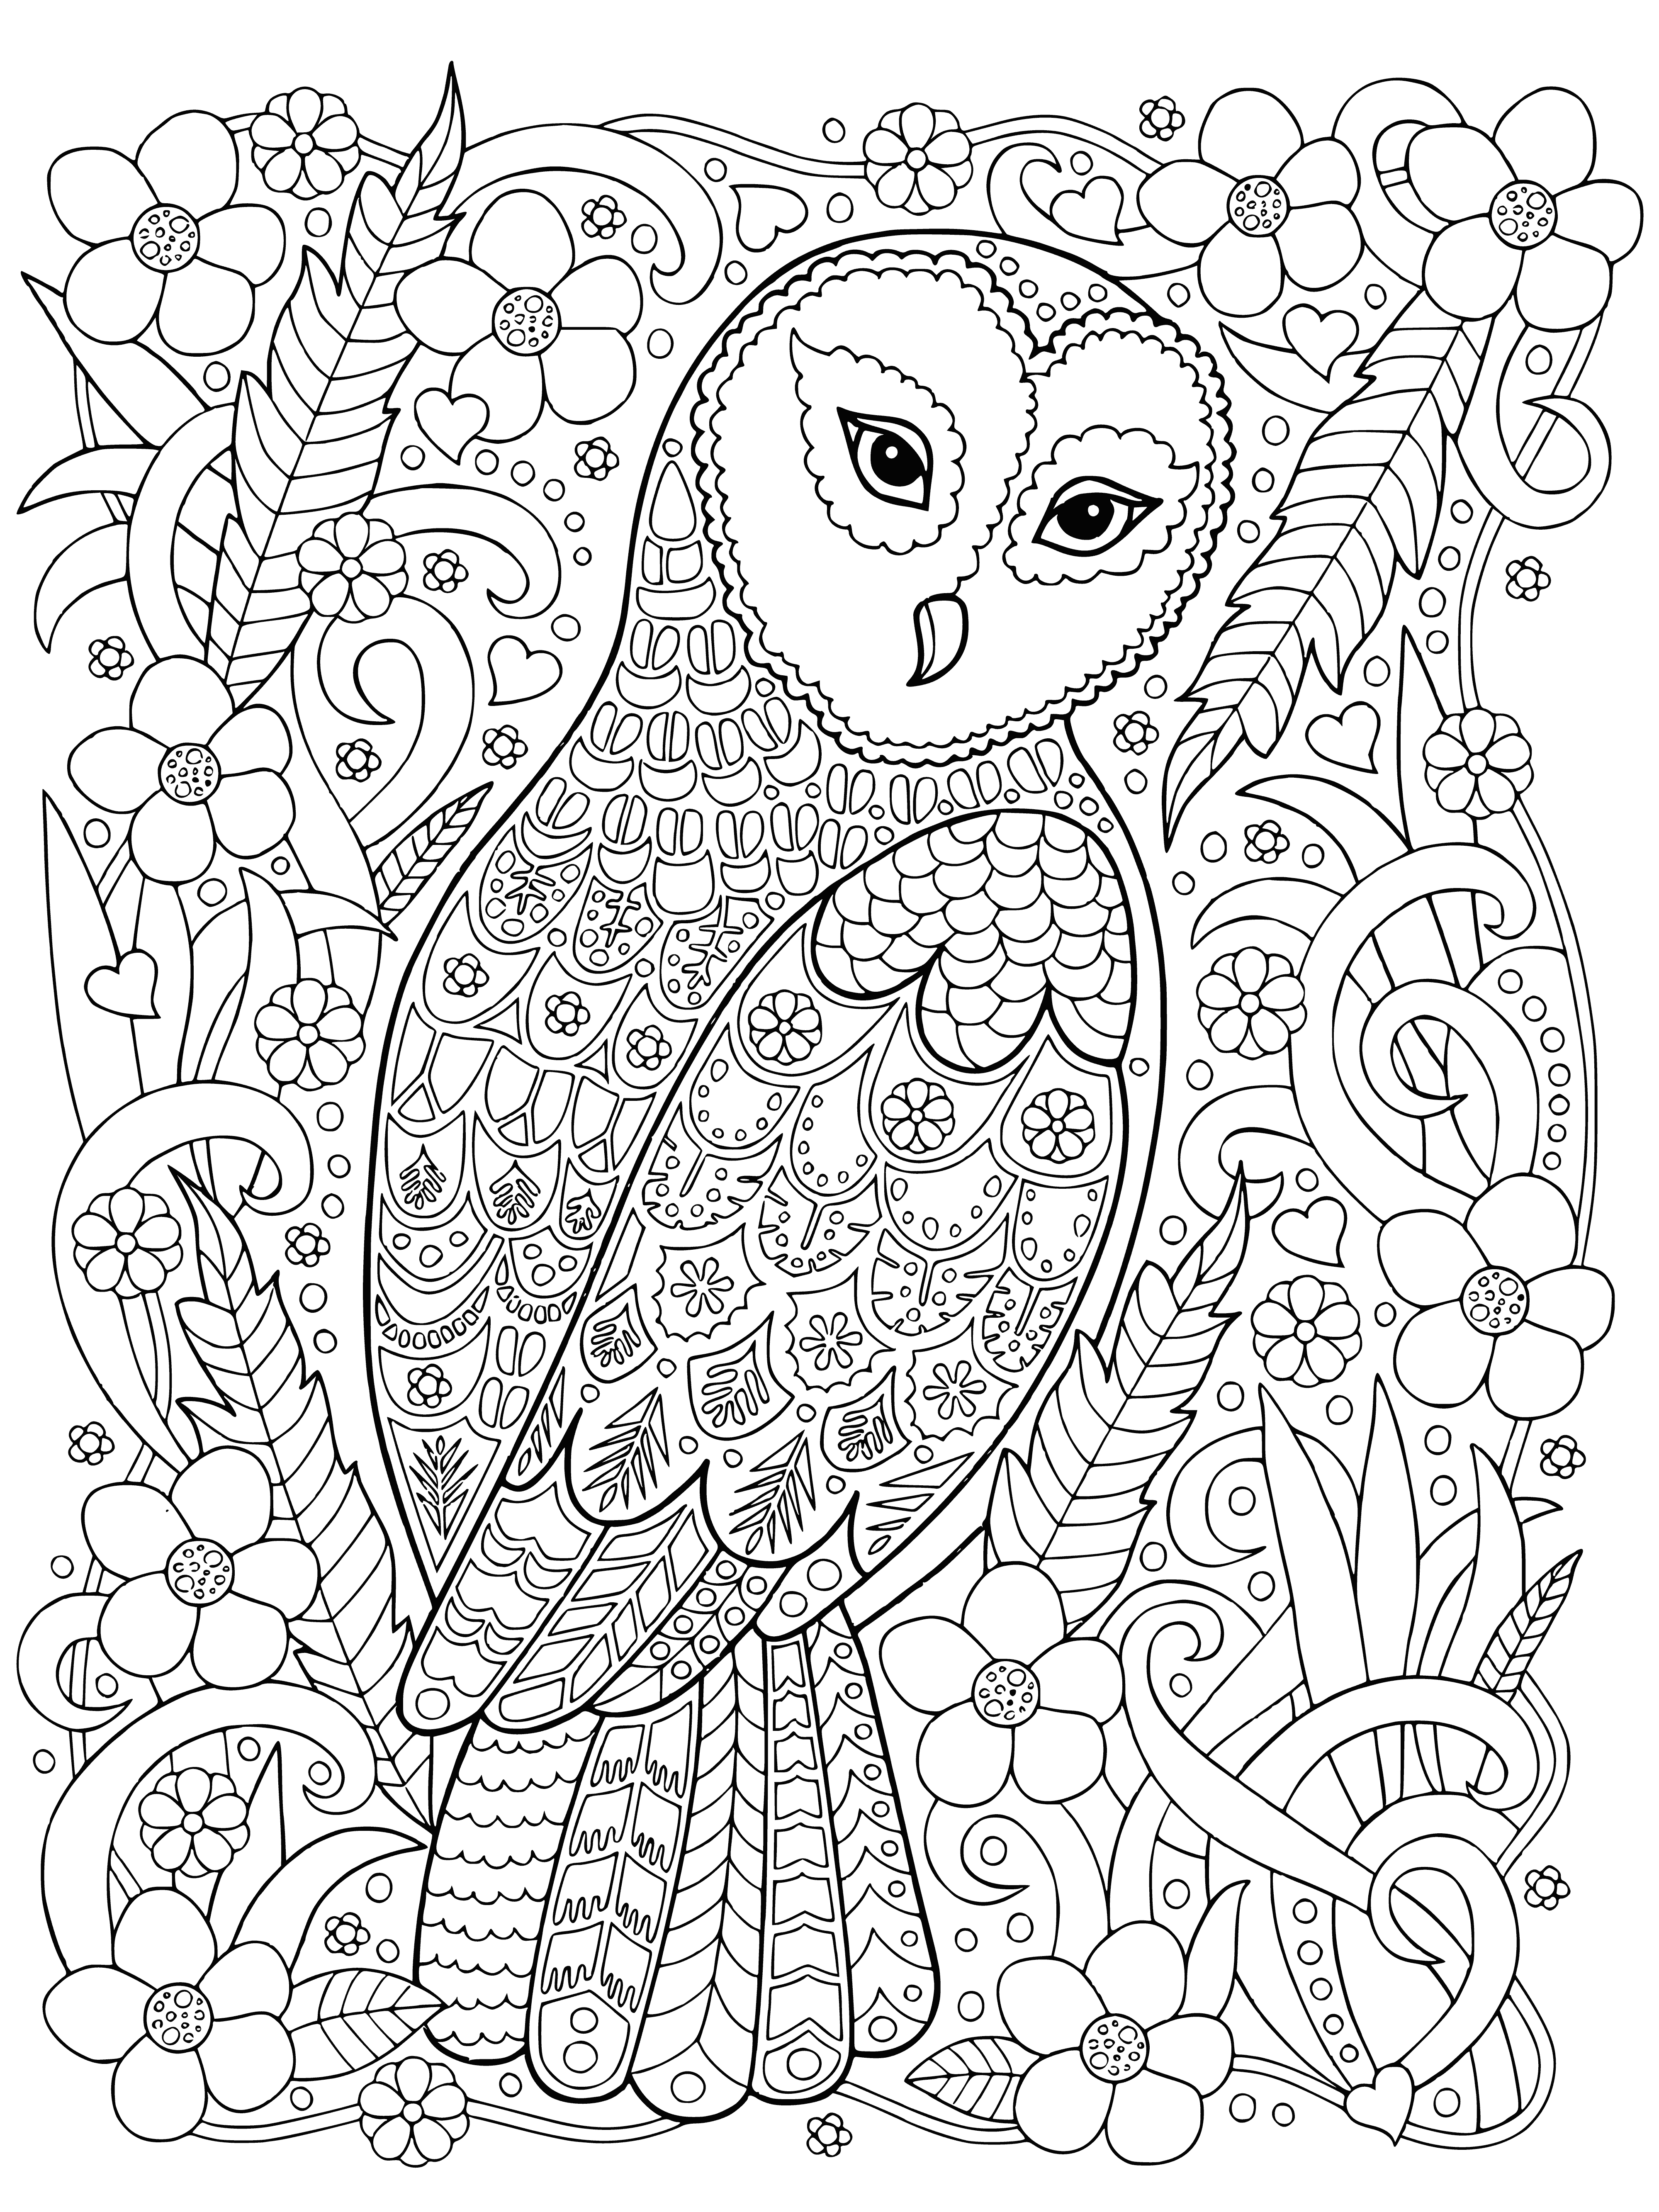 coloring page: Polar owl coloring page: big eyes, white face w/ black spots, black wings & tail.